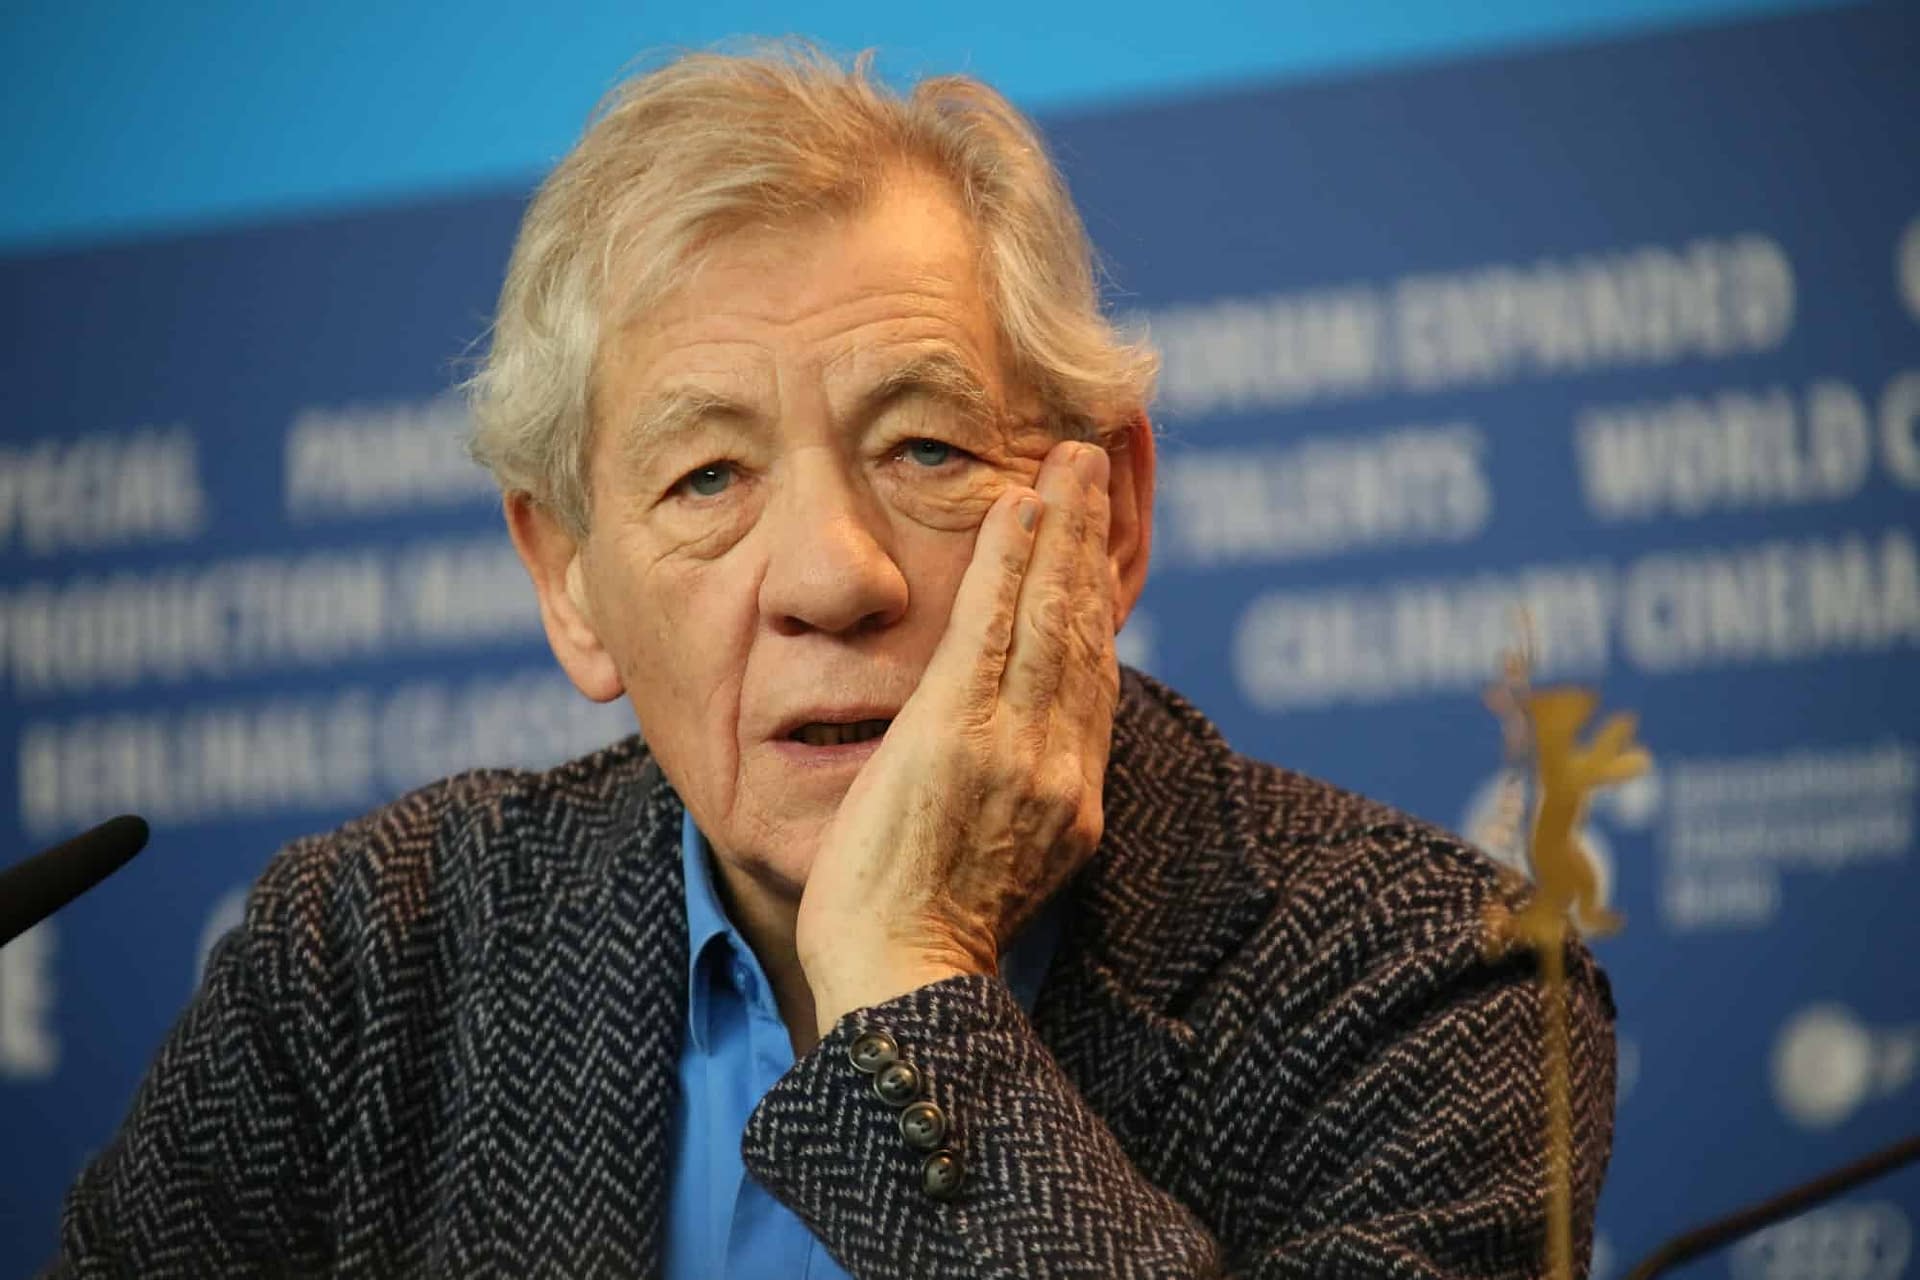 Ian McKellen Clarifies His Position on the Allegations Against Bryan Singer